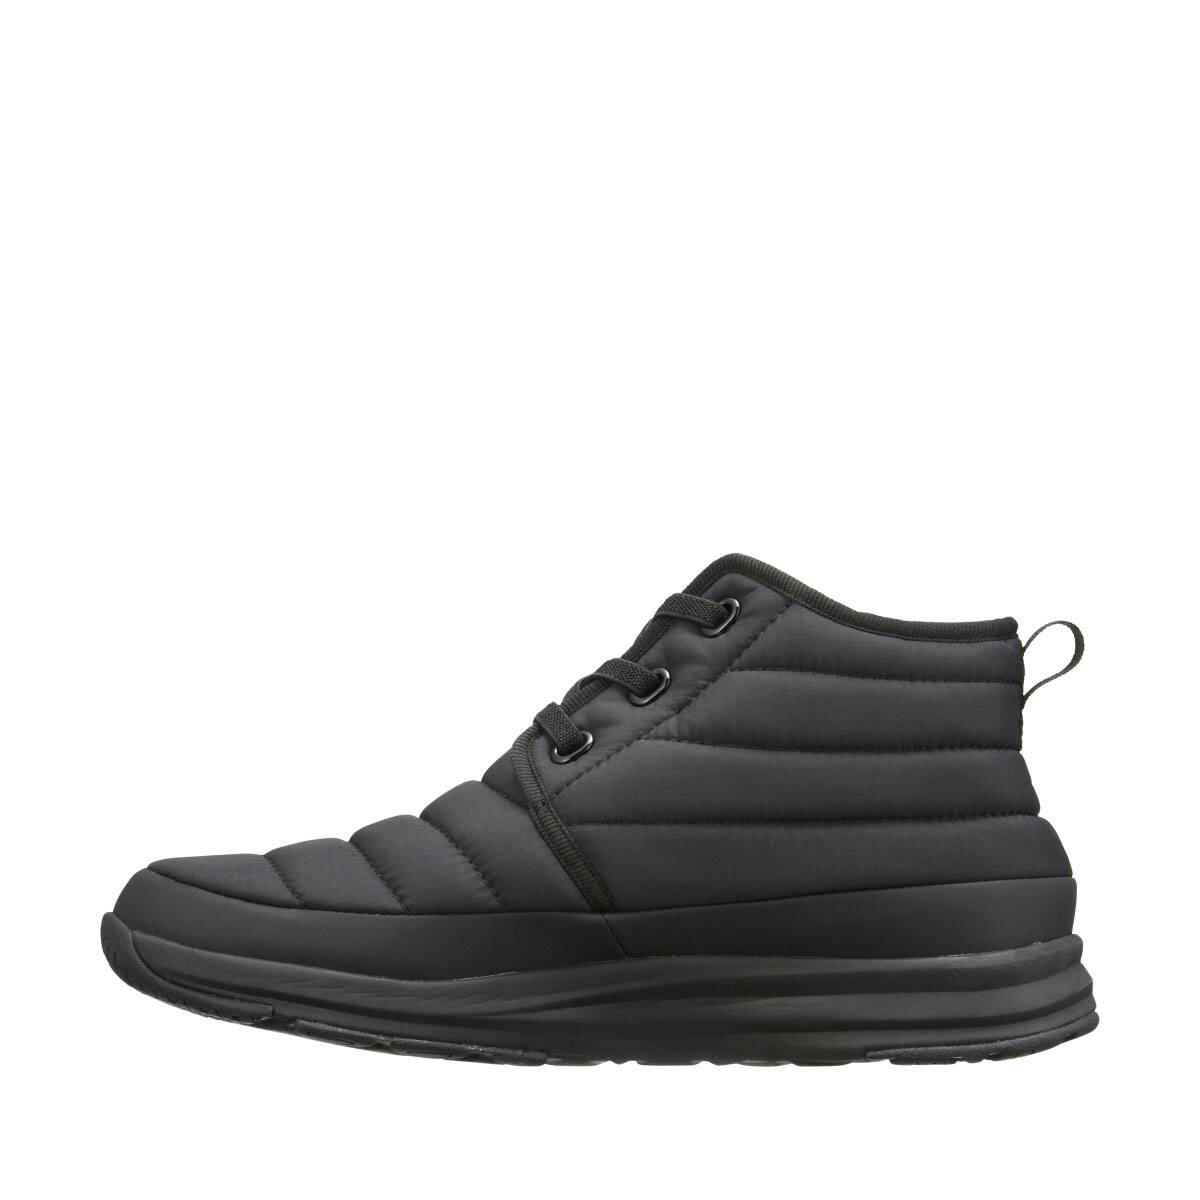 THE NORTH FACE NSE TRACTION LITE CHUKKA 